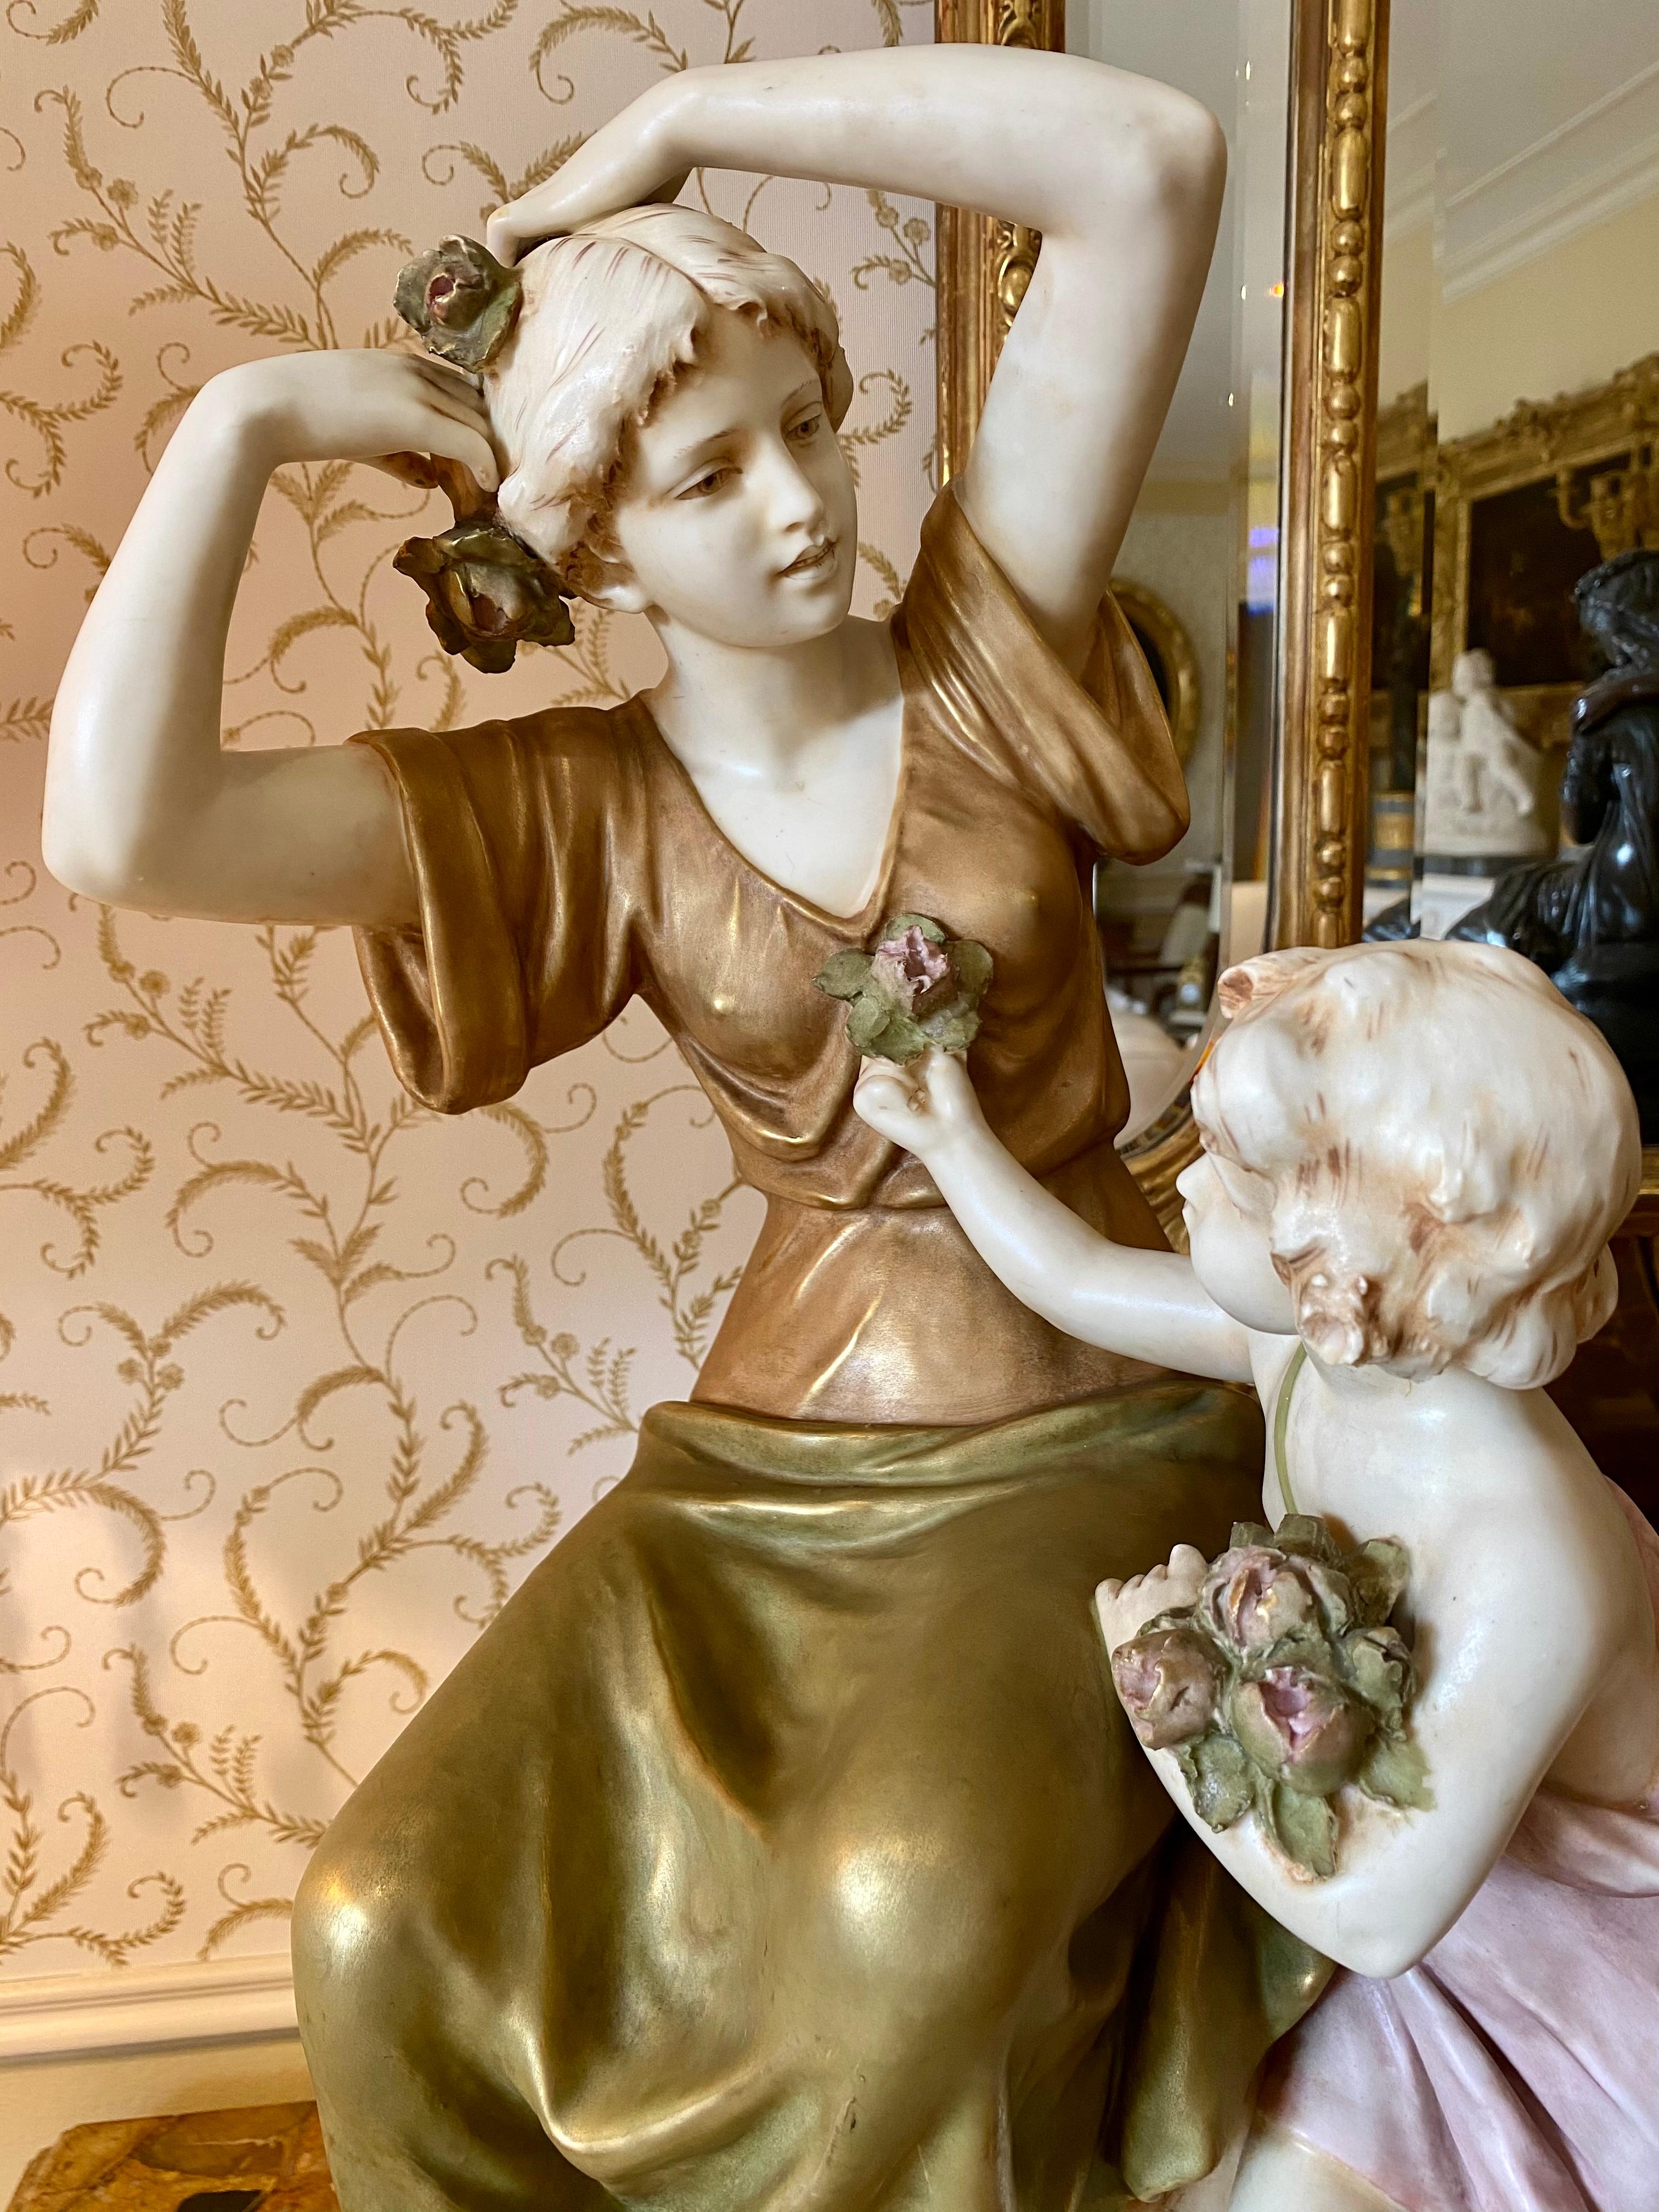 Polychrome porcelain group with gold highlights representing a young girl offering flowers to her mother to hang them in her hair. Signed with the Royal Dux stamp below and marked on the back with the initials 